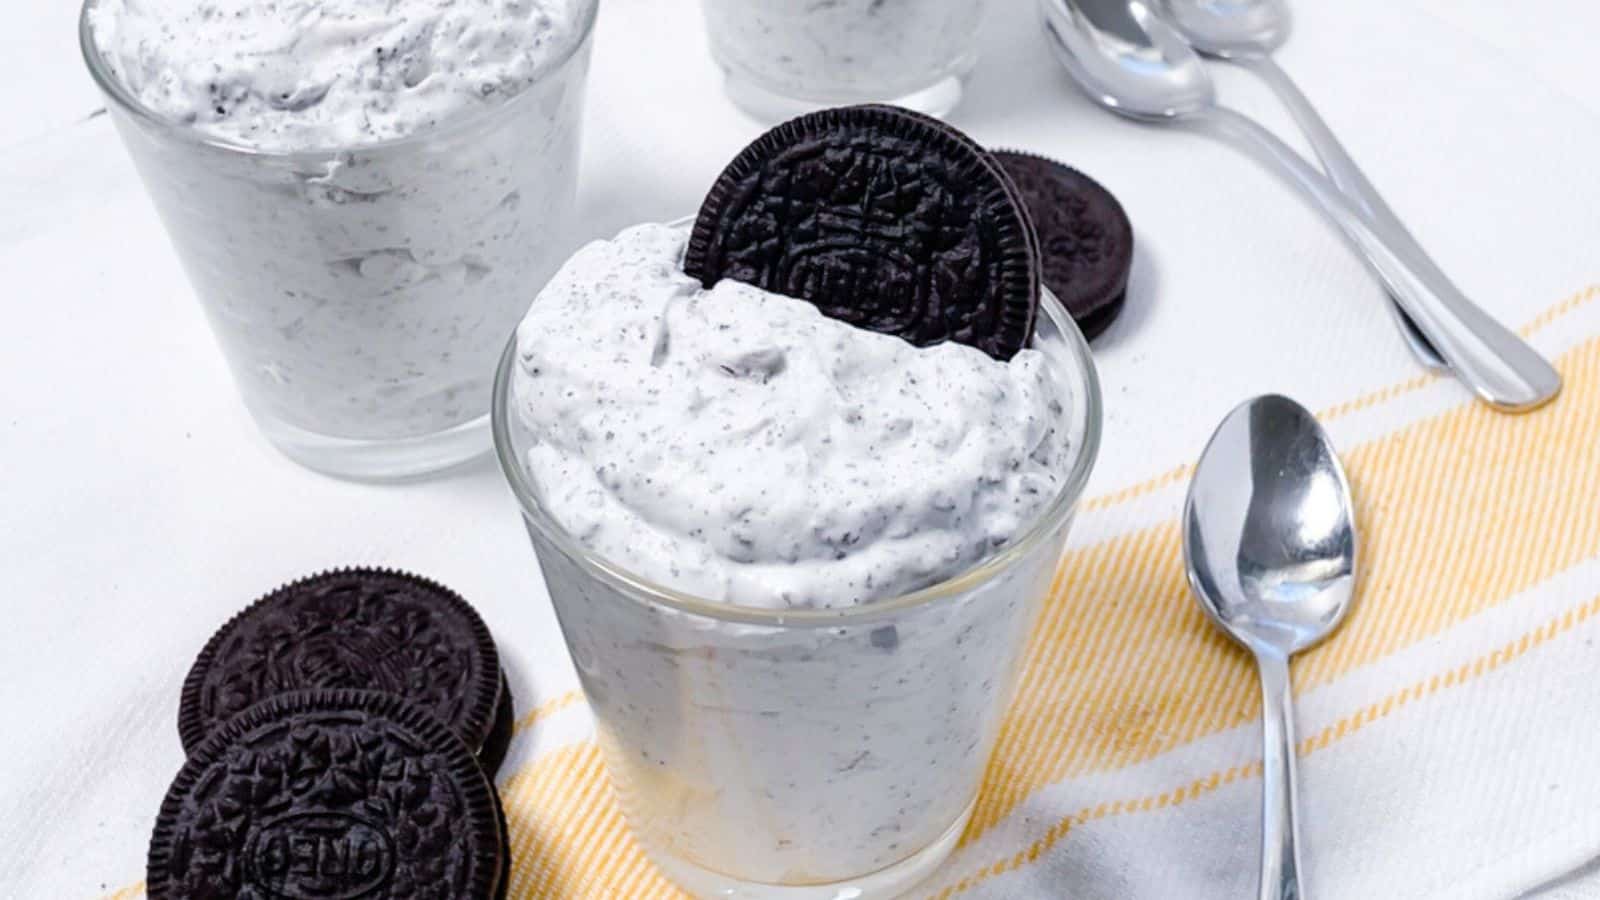 Two glasses of cookies and cream dessert topped with oreo cookies, served on a white tablecloth with a yellow-striped napkin and spoons.